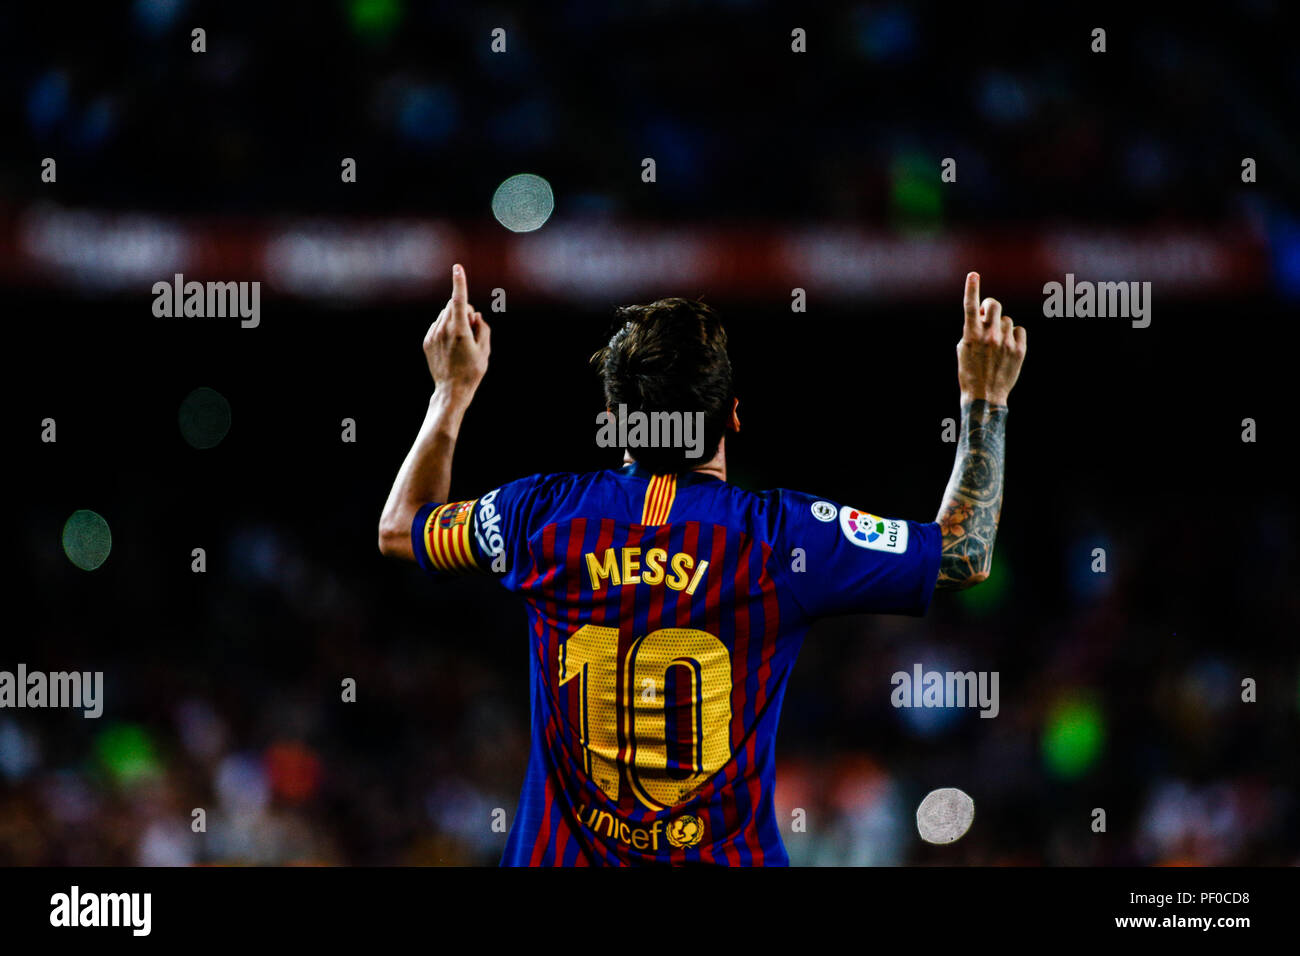 Barcelona, Spain.. 18th Aug, 2018. Leo Messi from Argentina celebrating his goal during the La Liga game between FC Barcelona against Deportivo Alaves in Camp Nou Stadium at Barcelona, on 18 of August of 2018, Spain. 18th Aug, 2018. Credit: AFP7/ZUMA Wire/Alamy Live News Credit: ZUMA Press, Inc./Alamy Live News Stock Photo